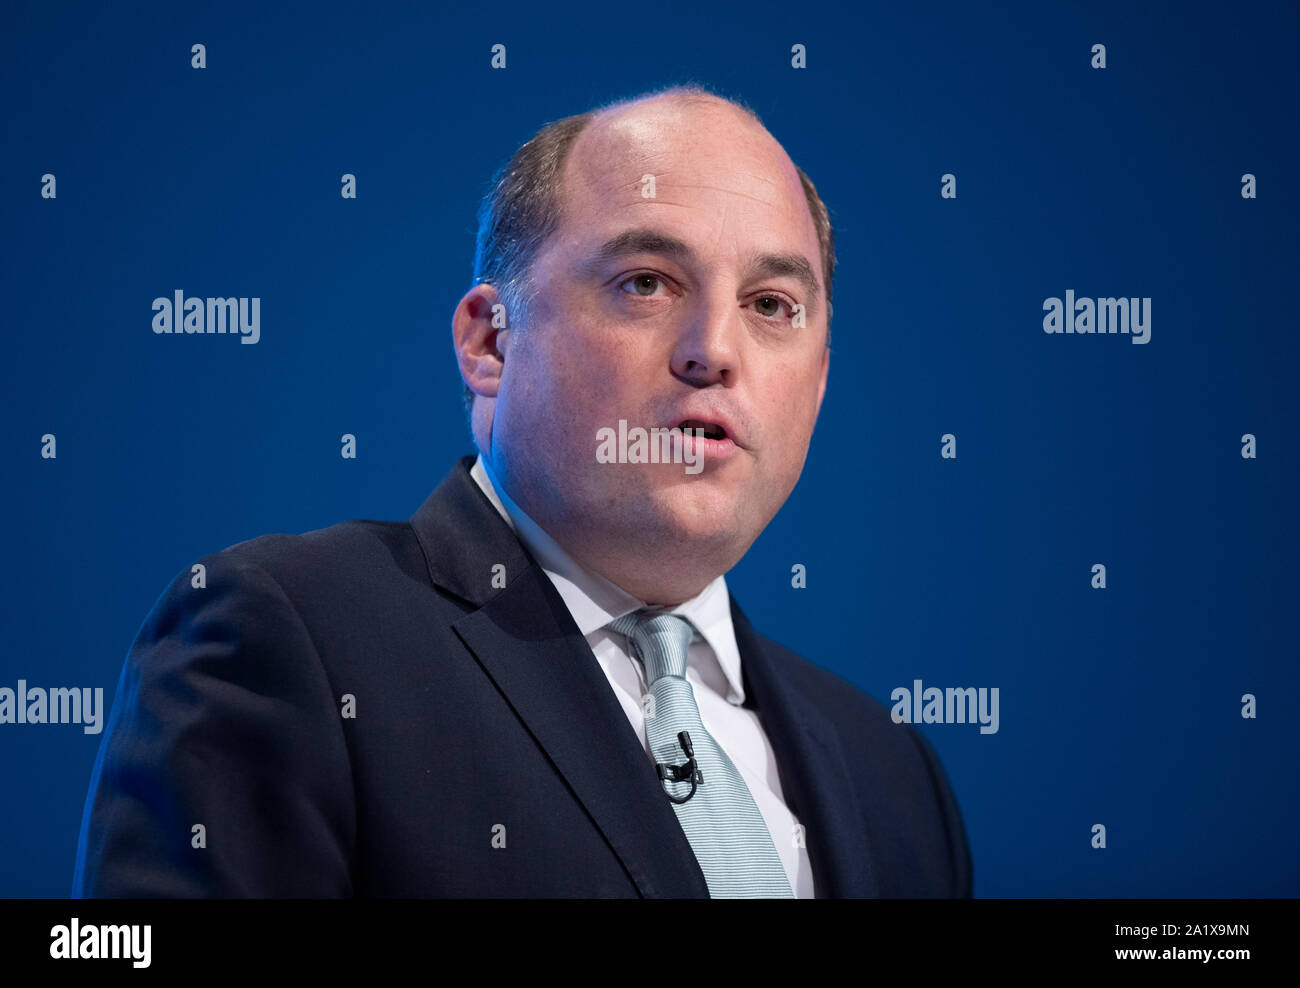 Manchester, UK. 29th September 2019. Ben Wallace, Secretary of State for Defence and MP for Wyre and Preston North speaks at day one of the Conservative Party Conference in Manchester. © Russell Hart/Alamy Live News. Stock Photo